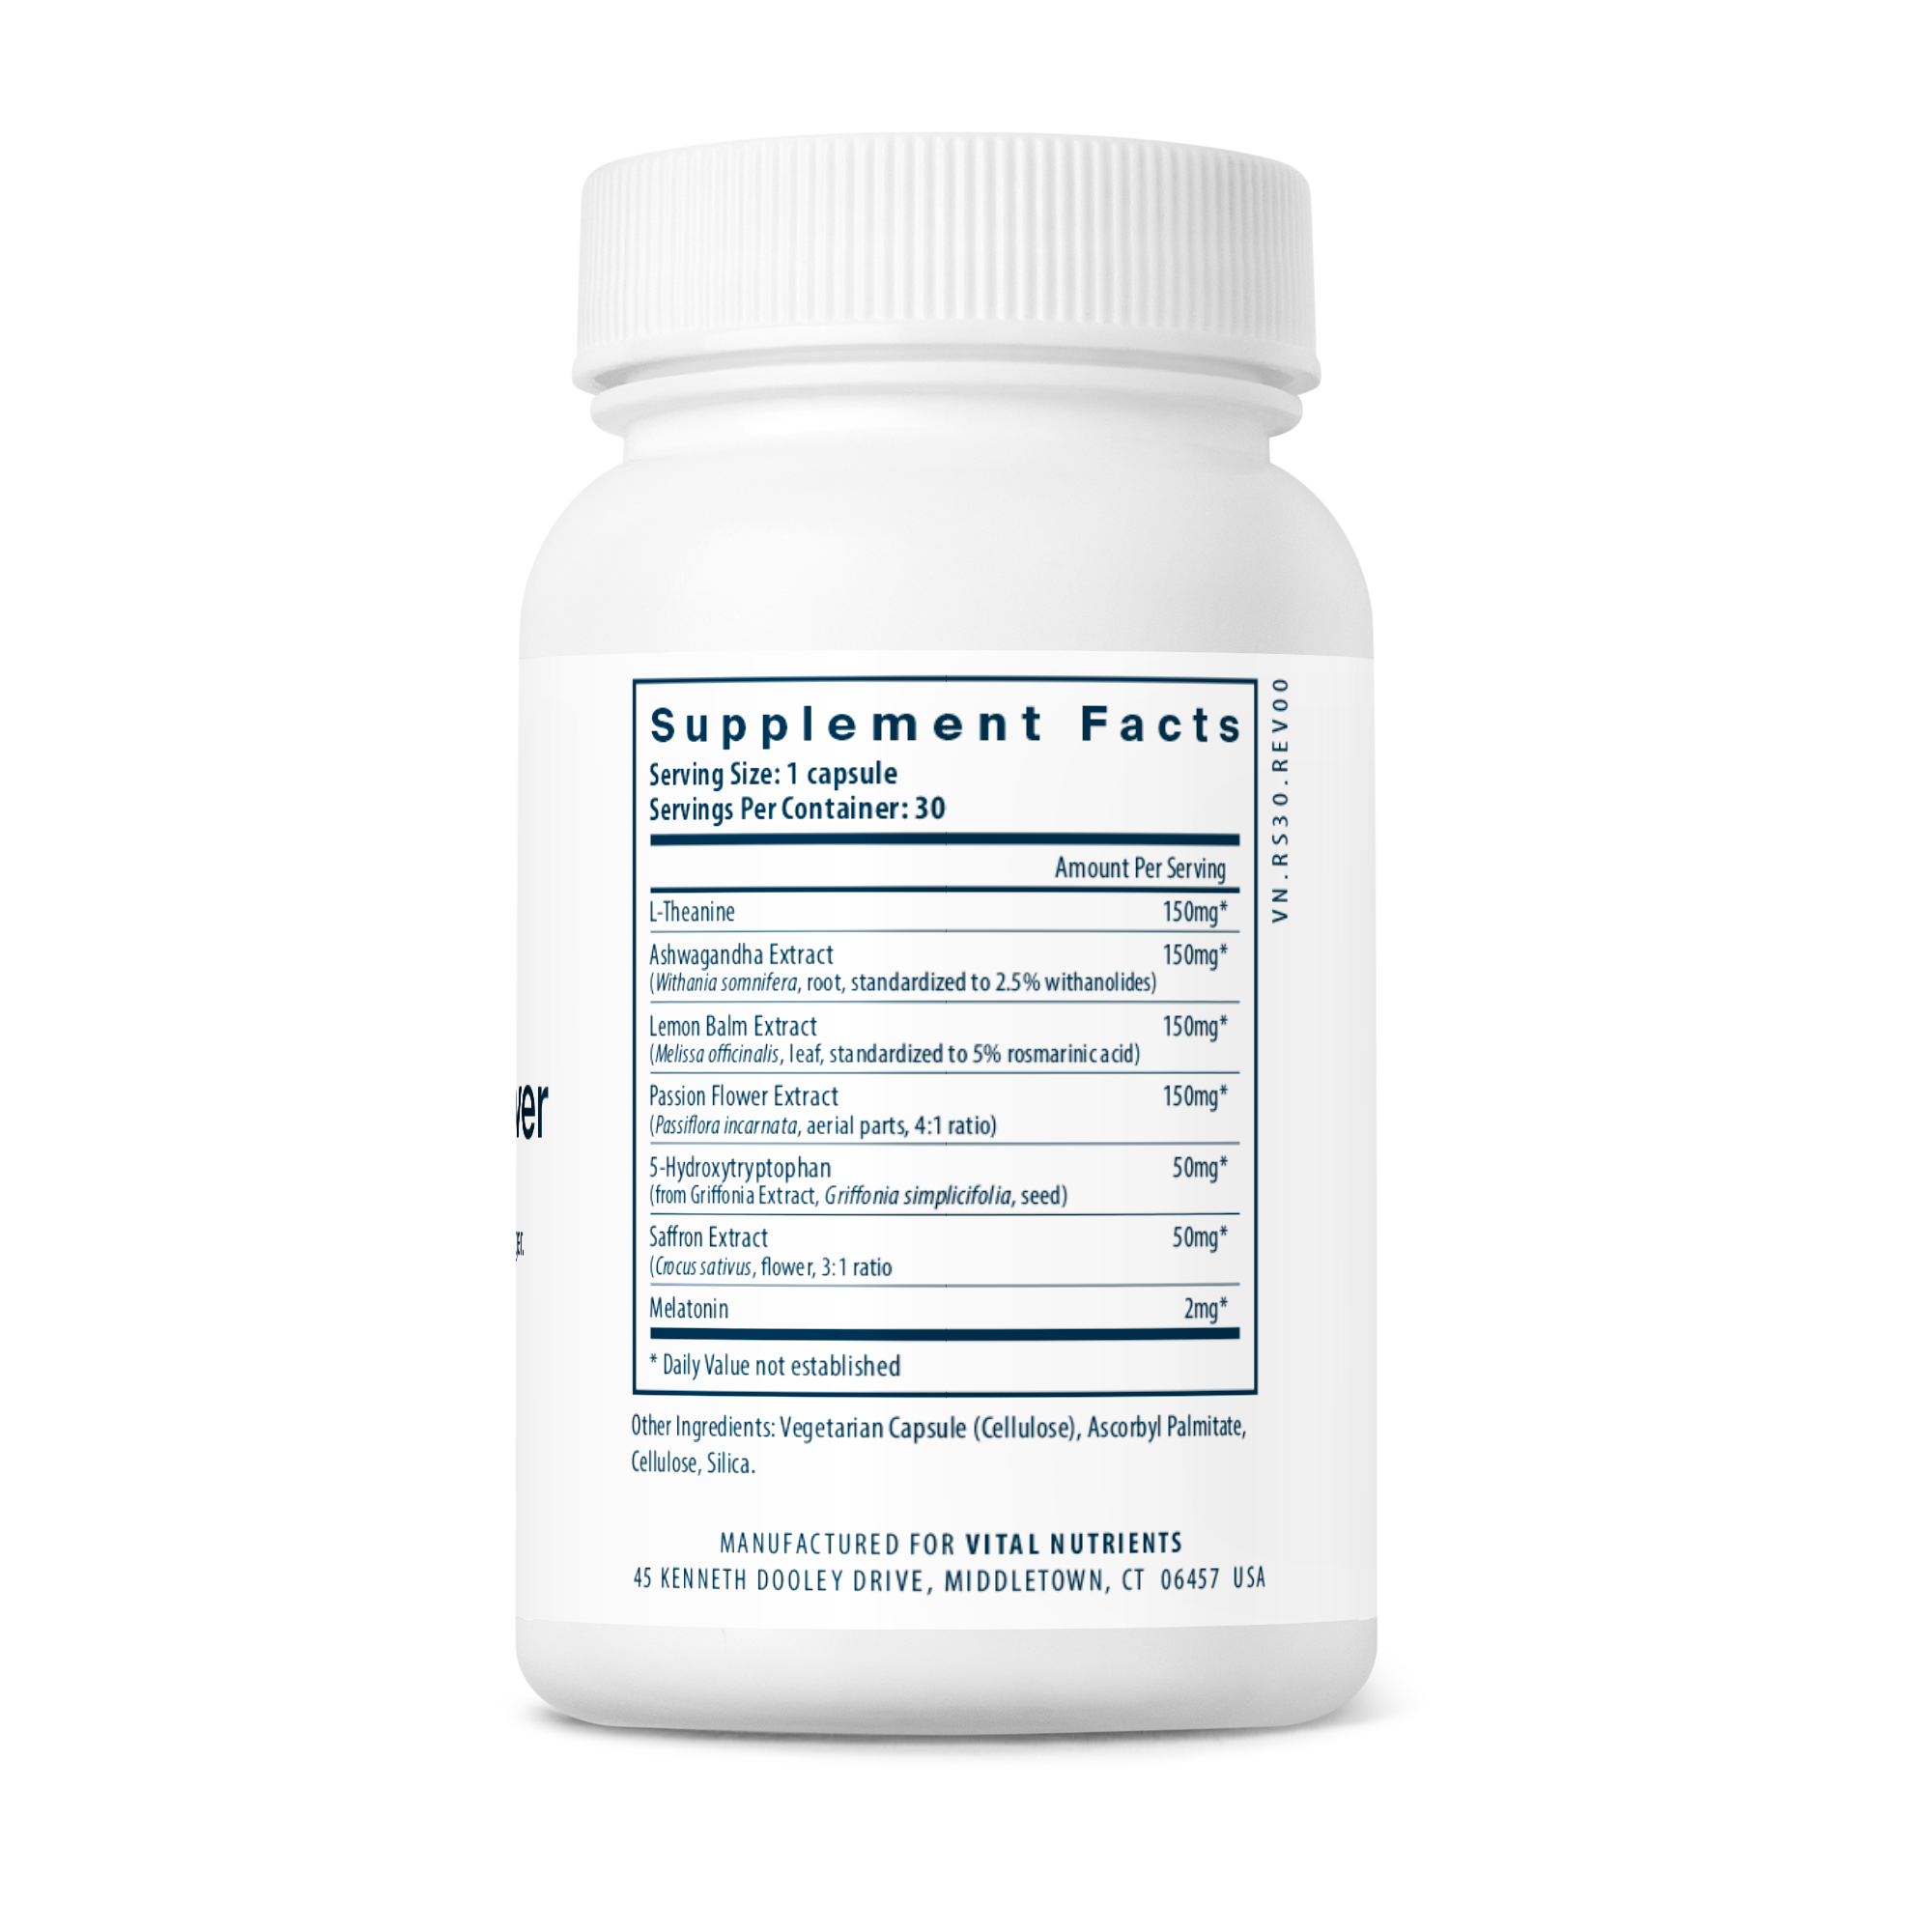 Vital Nutrients Sleep and Recover Supplement Facts Panel on bottle